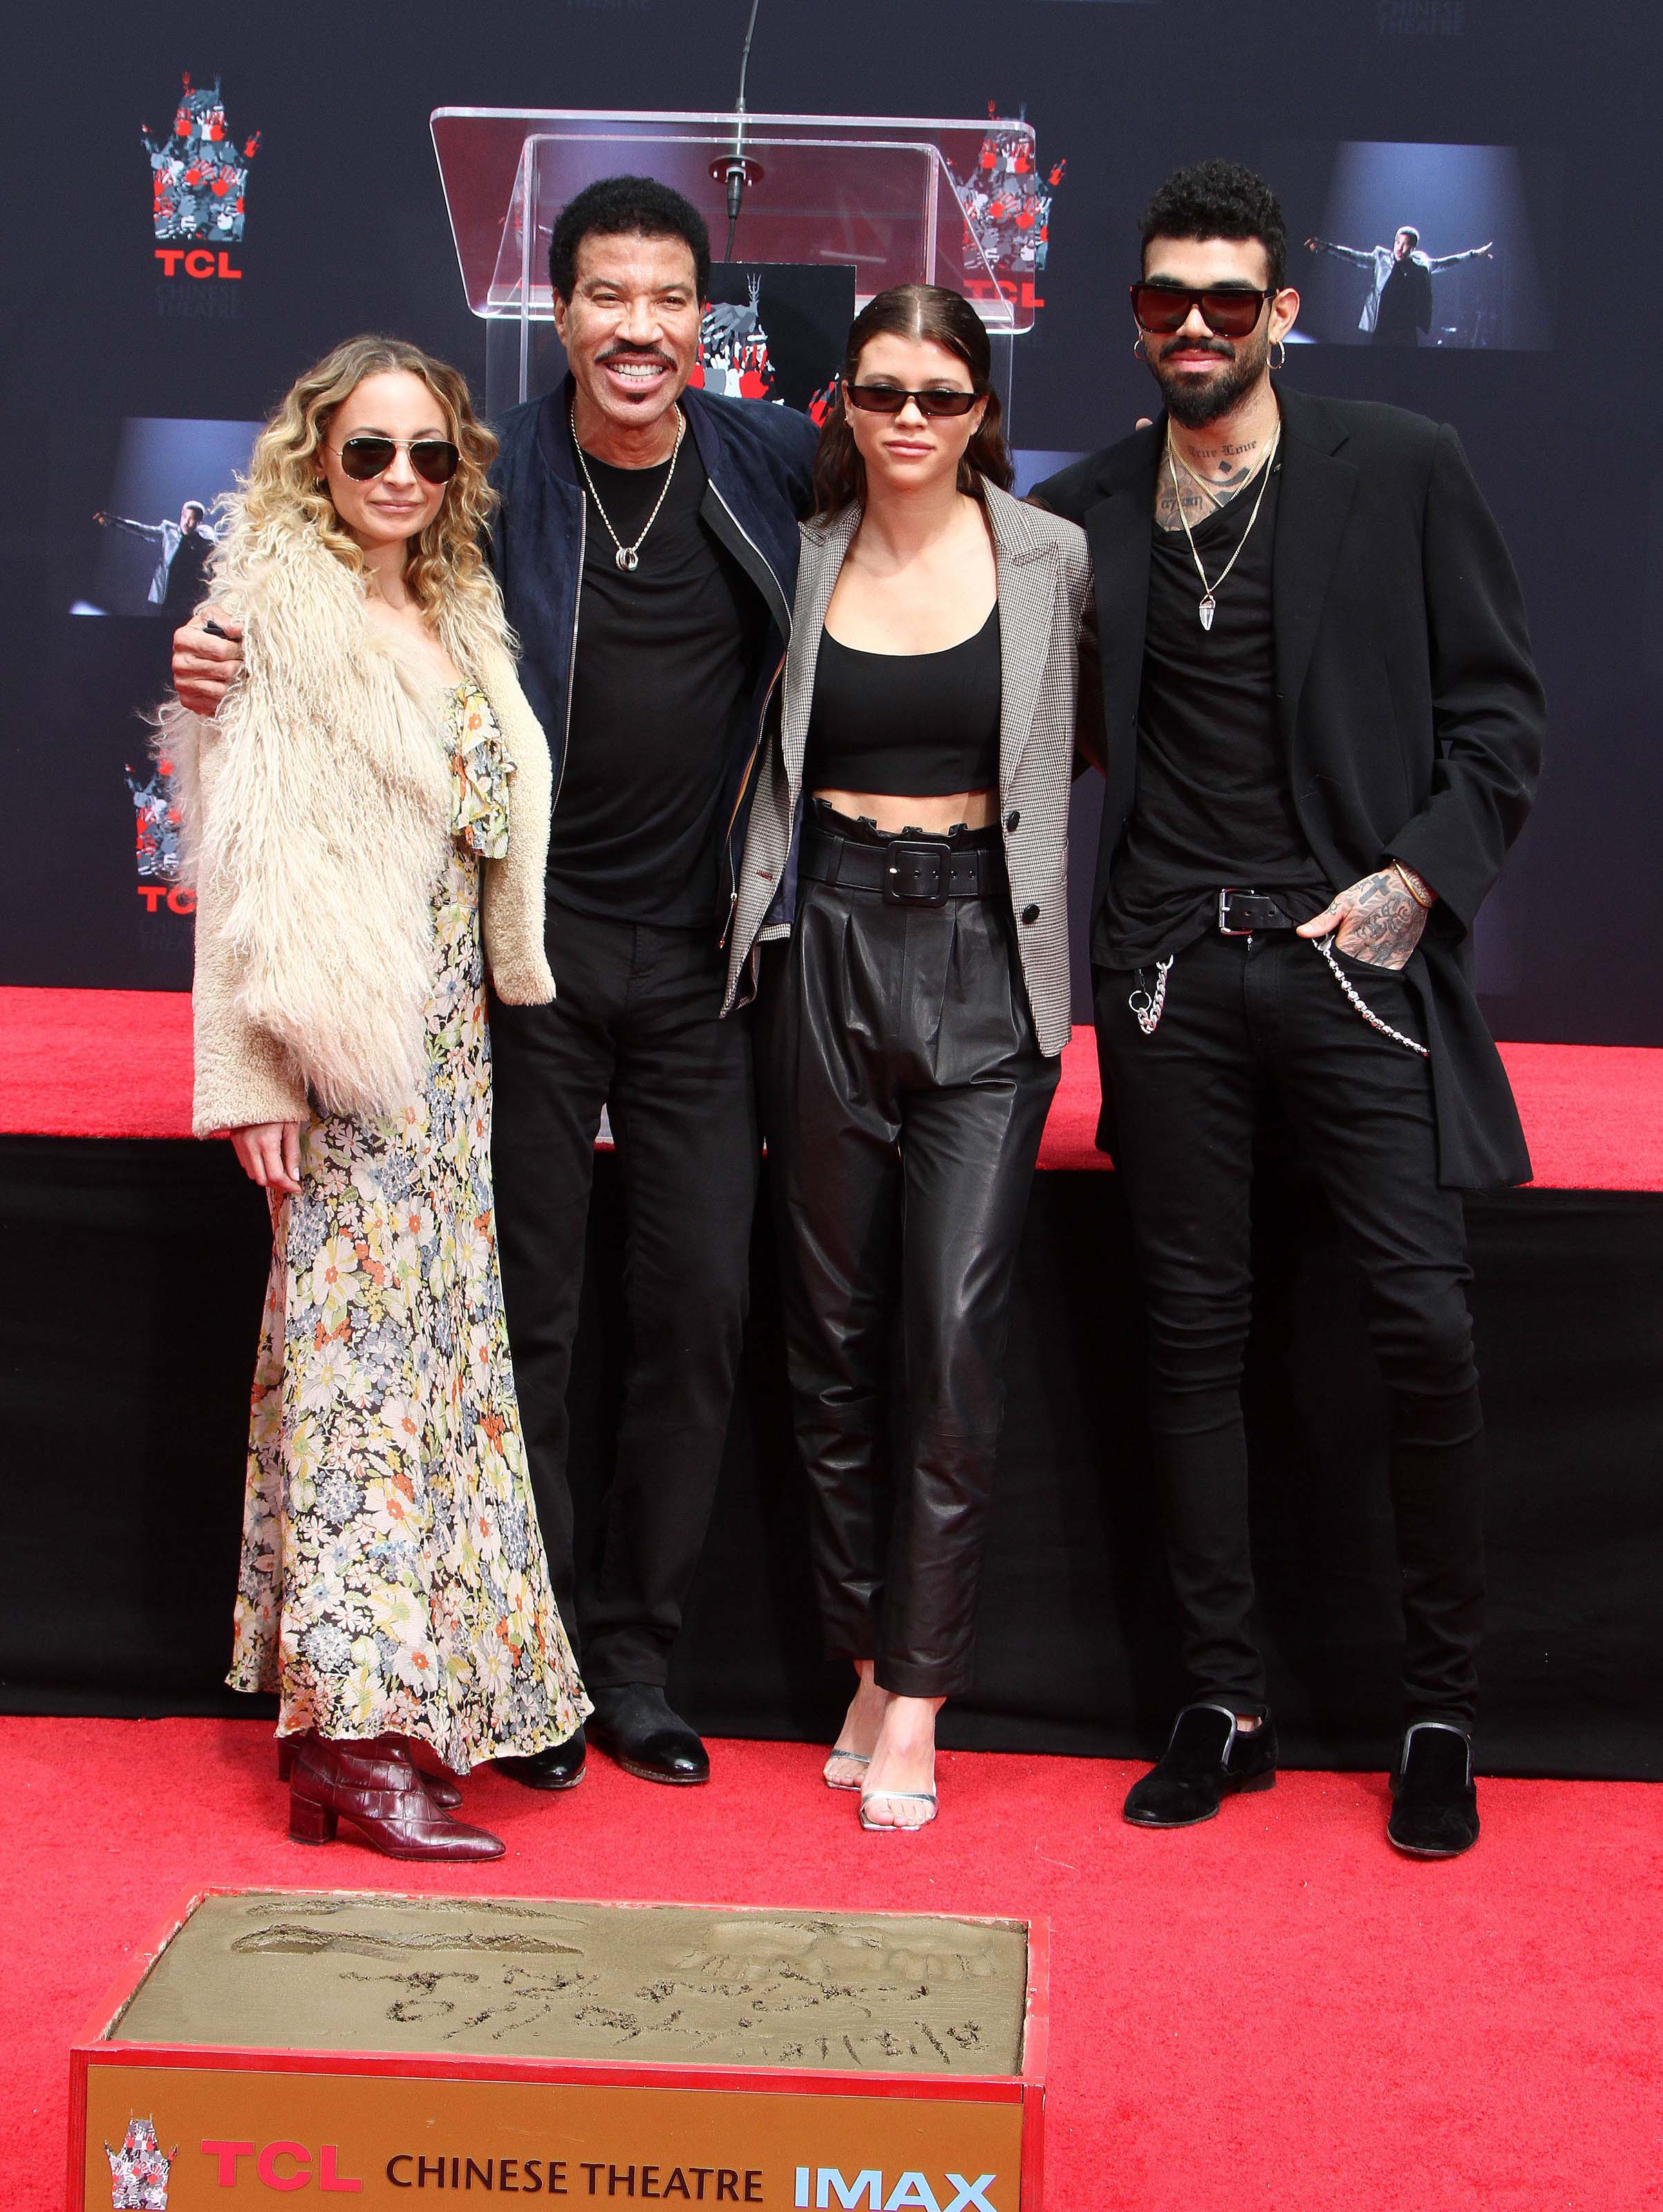 Sofia Richie attends Lionel Richie’s Hand and Footprint Ceremony